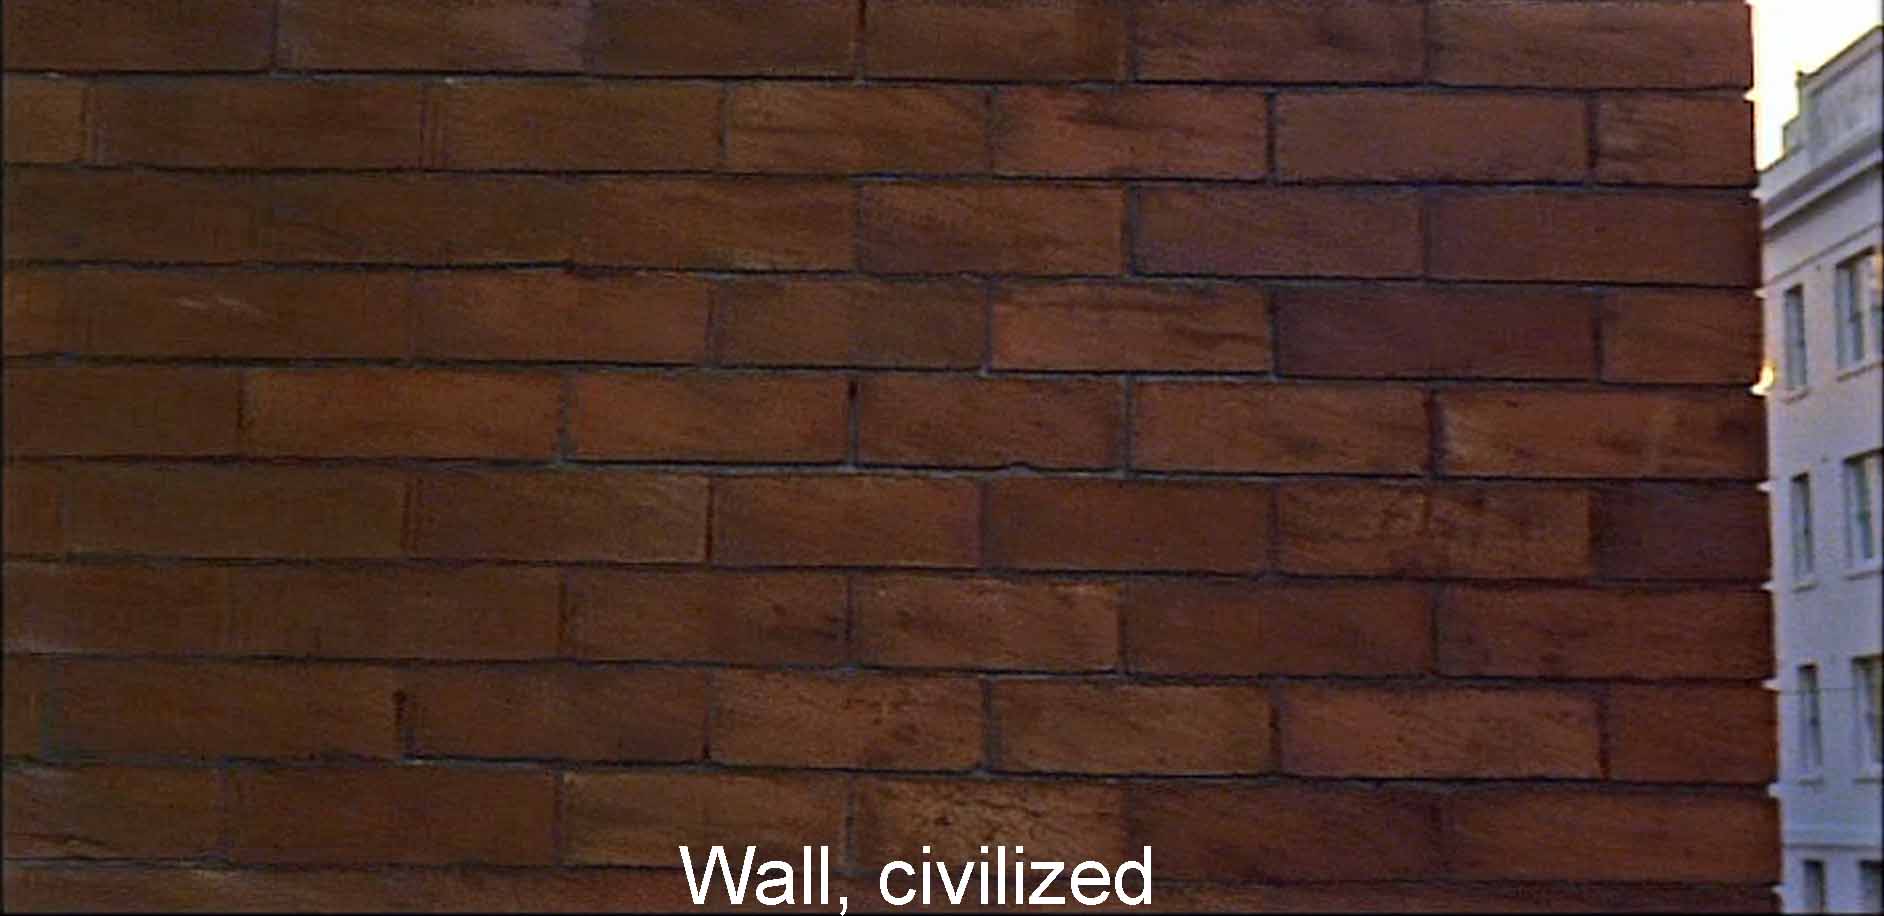 Wall, civilized